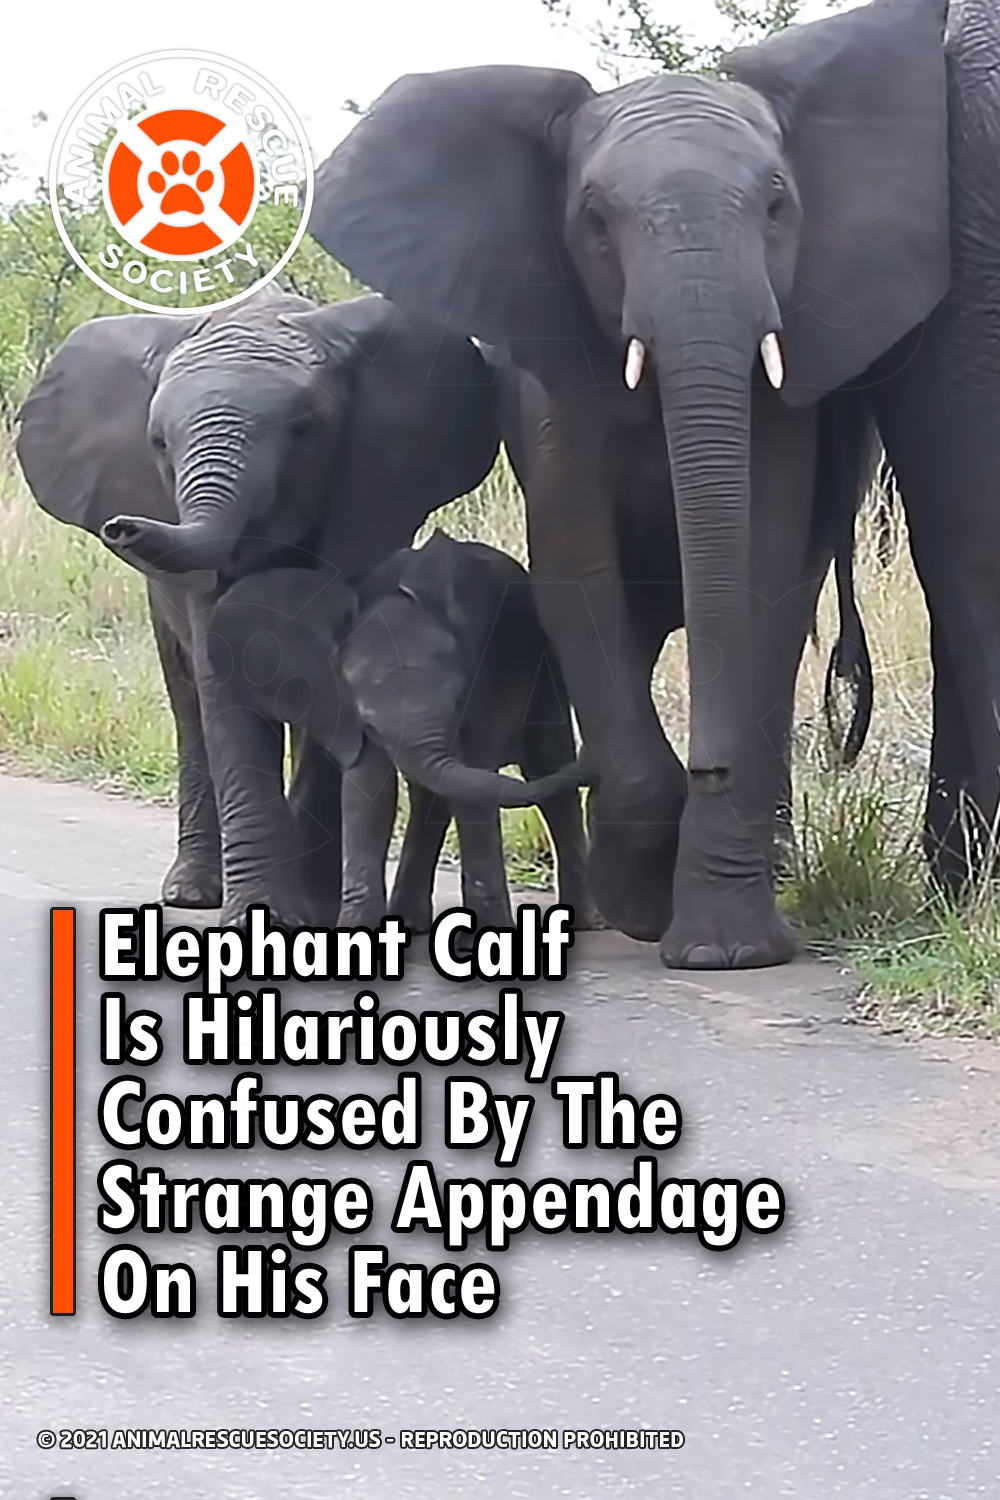 Elephant Calf Is Hilariously Confused By The Strange Appendage On His Face